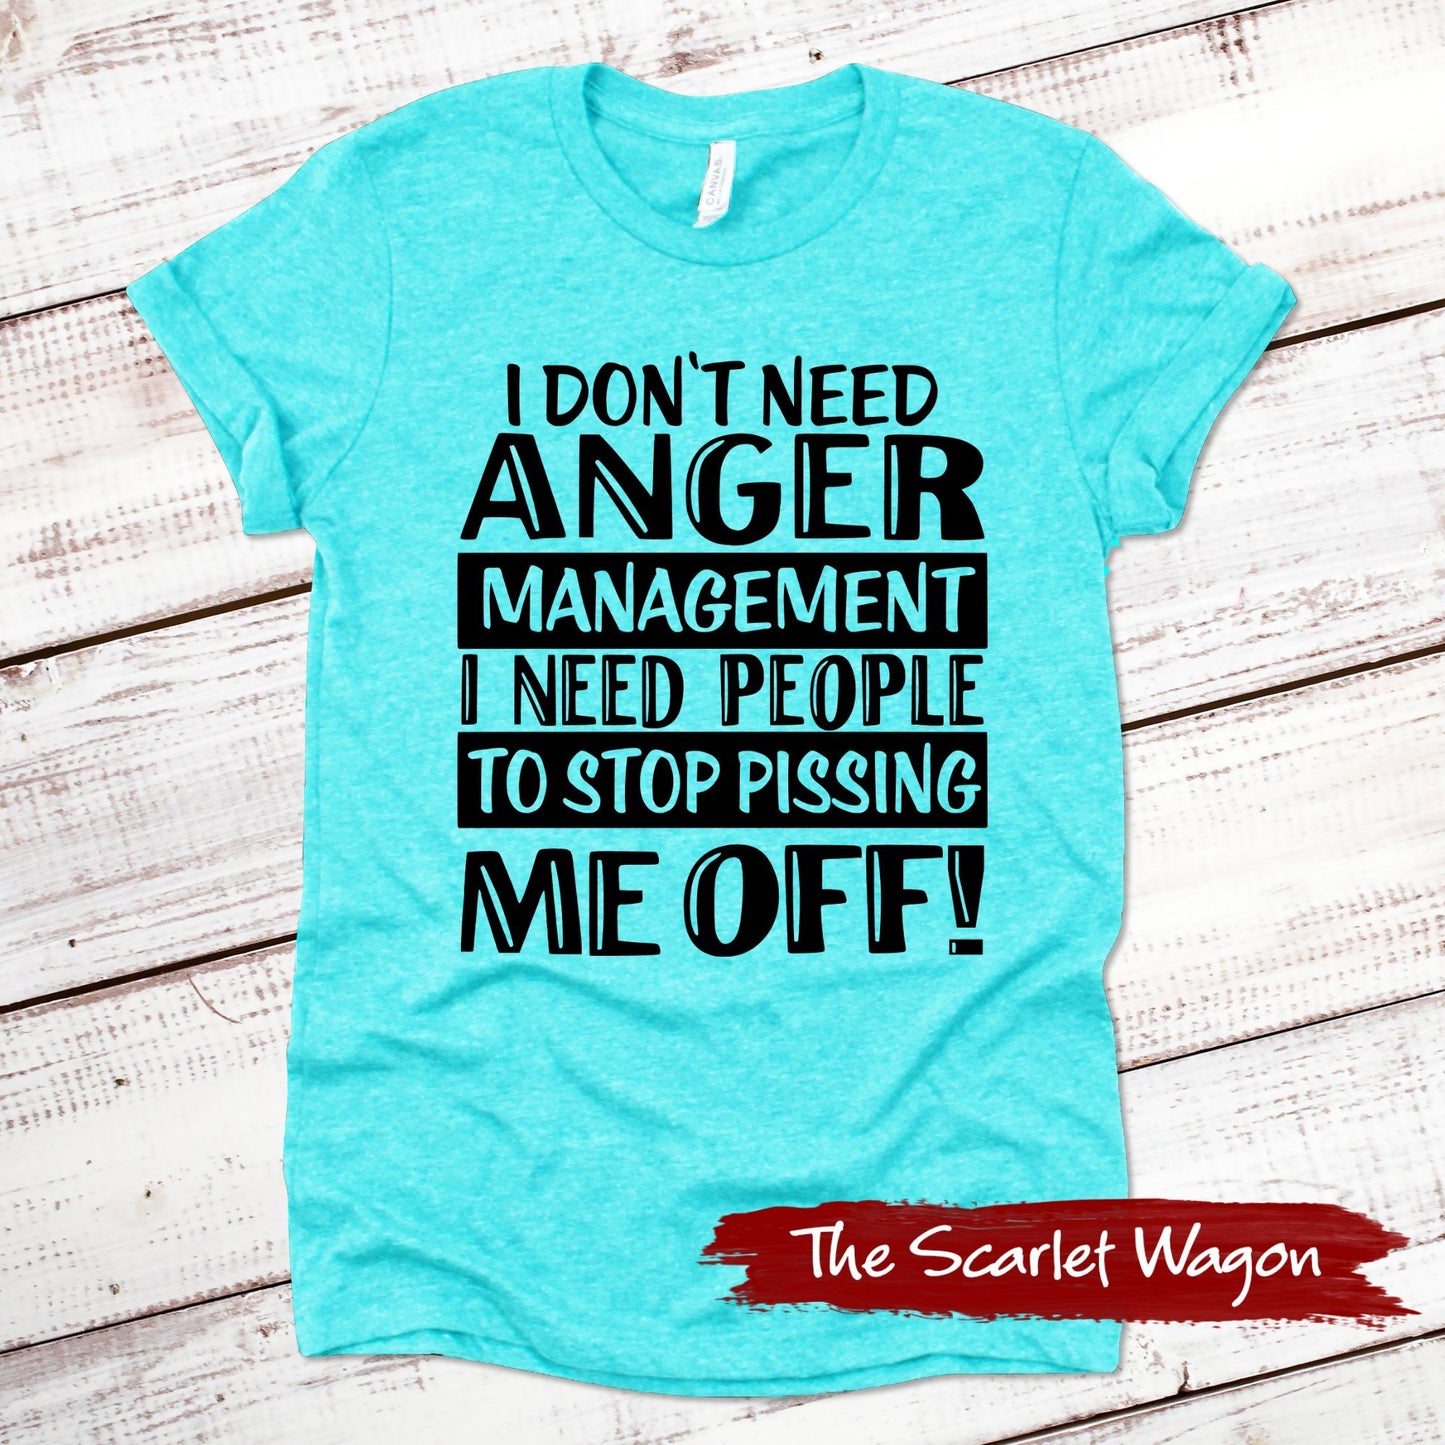 I Don't Need Anger Management Funny Shirt Scarlet Wagon Heather Teal XS 